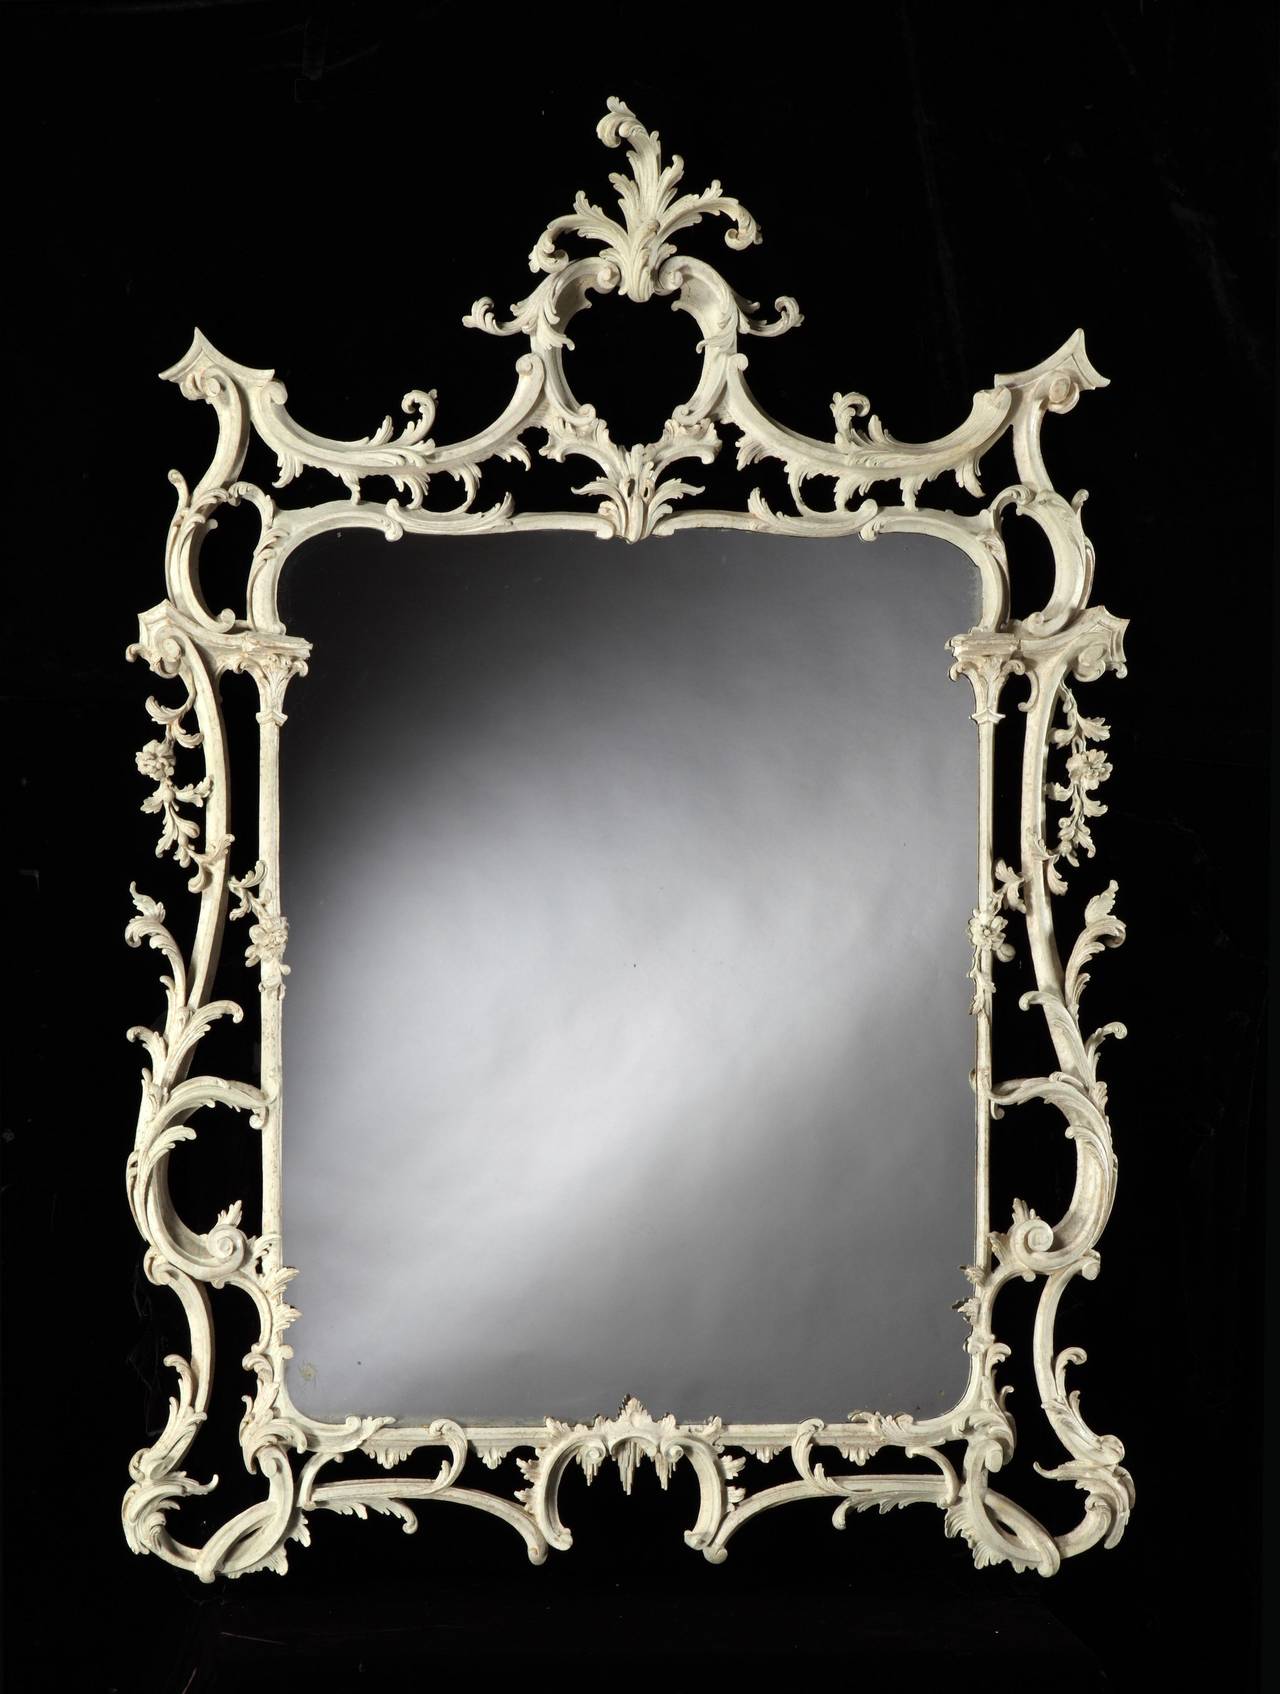 A highly important and extremely rare mid-18th century white painted overmantel mirror retaining most of the original paint surface, attributed to Thomas Chippendale, having a replaced 19th century rectangular mirror plate. The fine quality frame